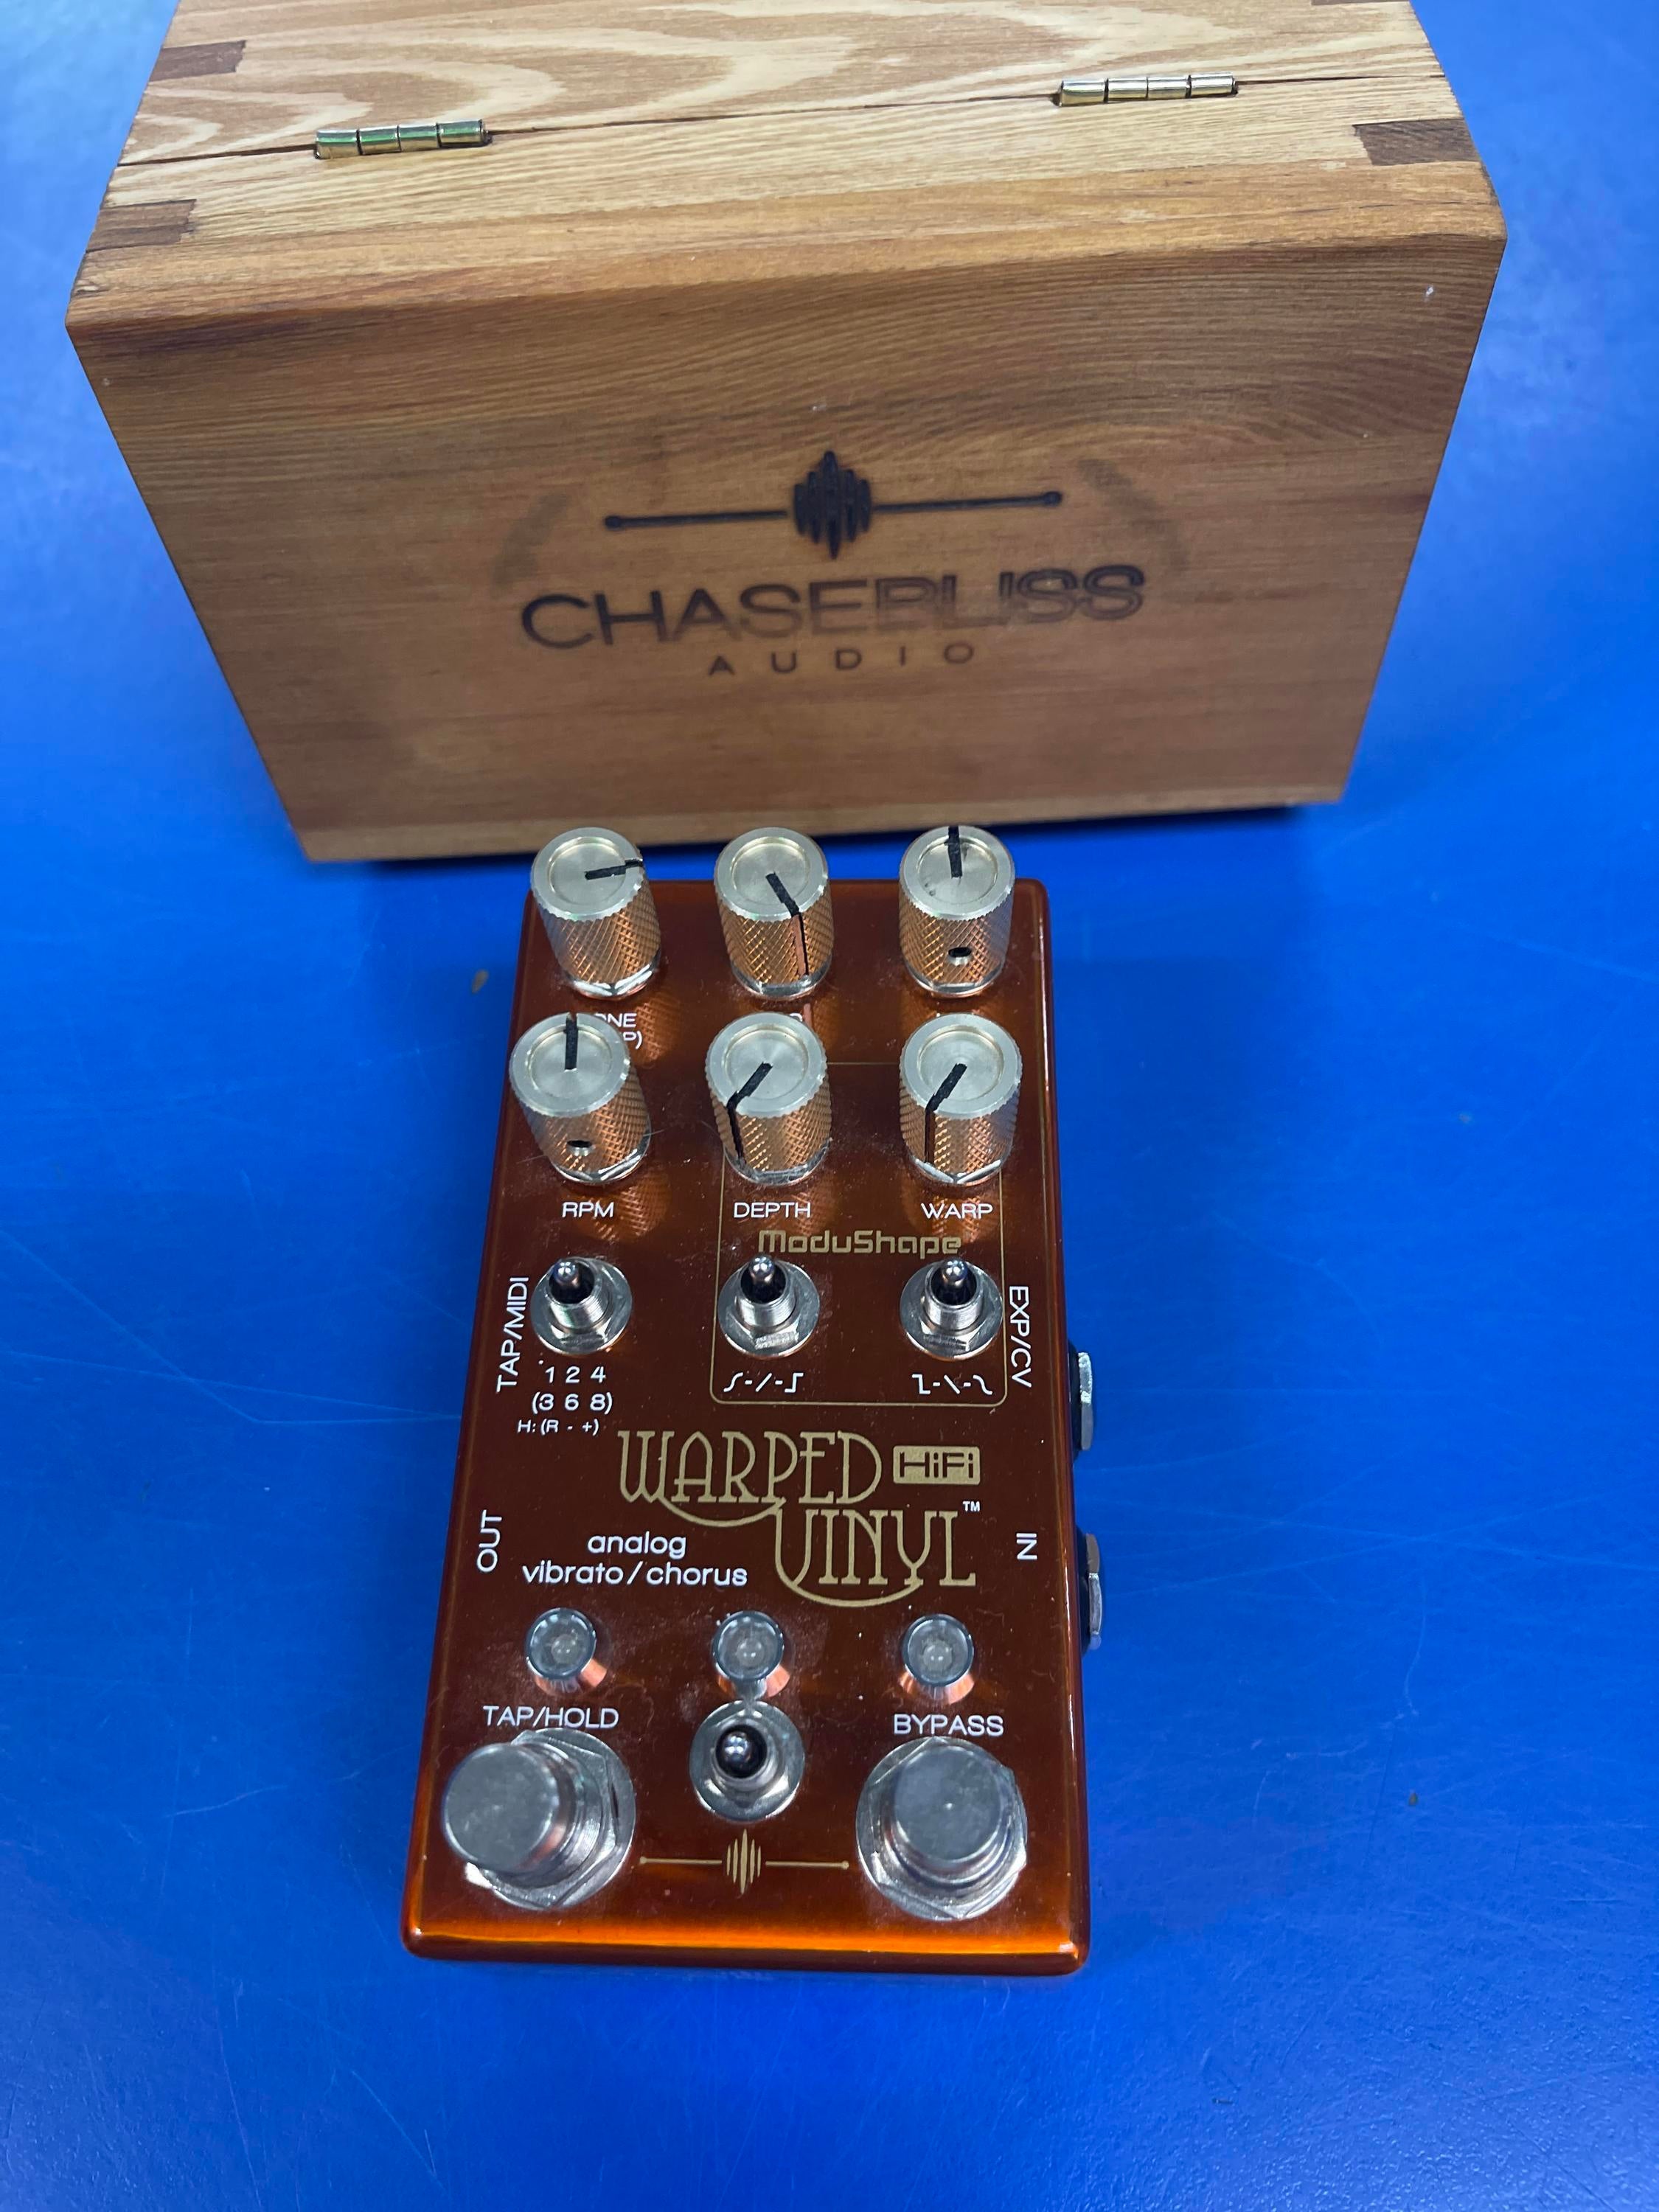 Used Chase Bliss Warped Vinyl Chorus Vibrato - Sweetwater's Gear